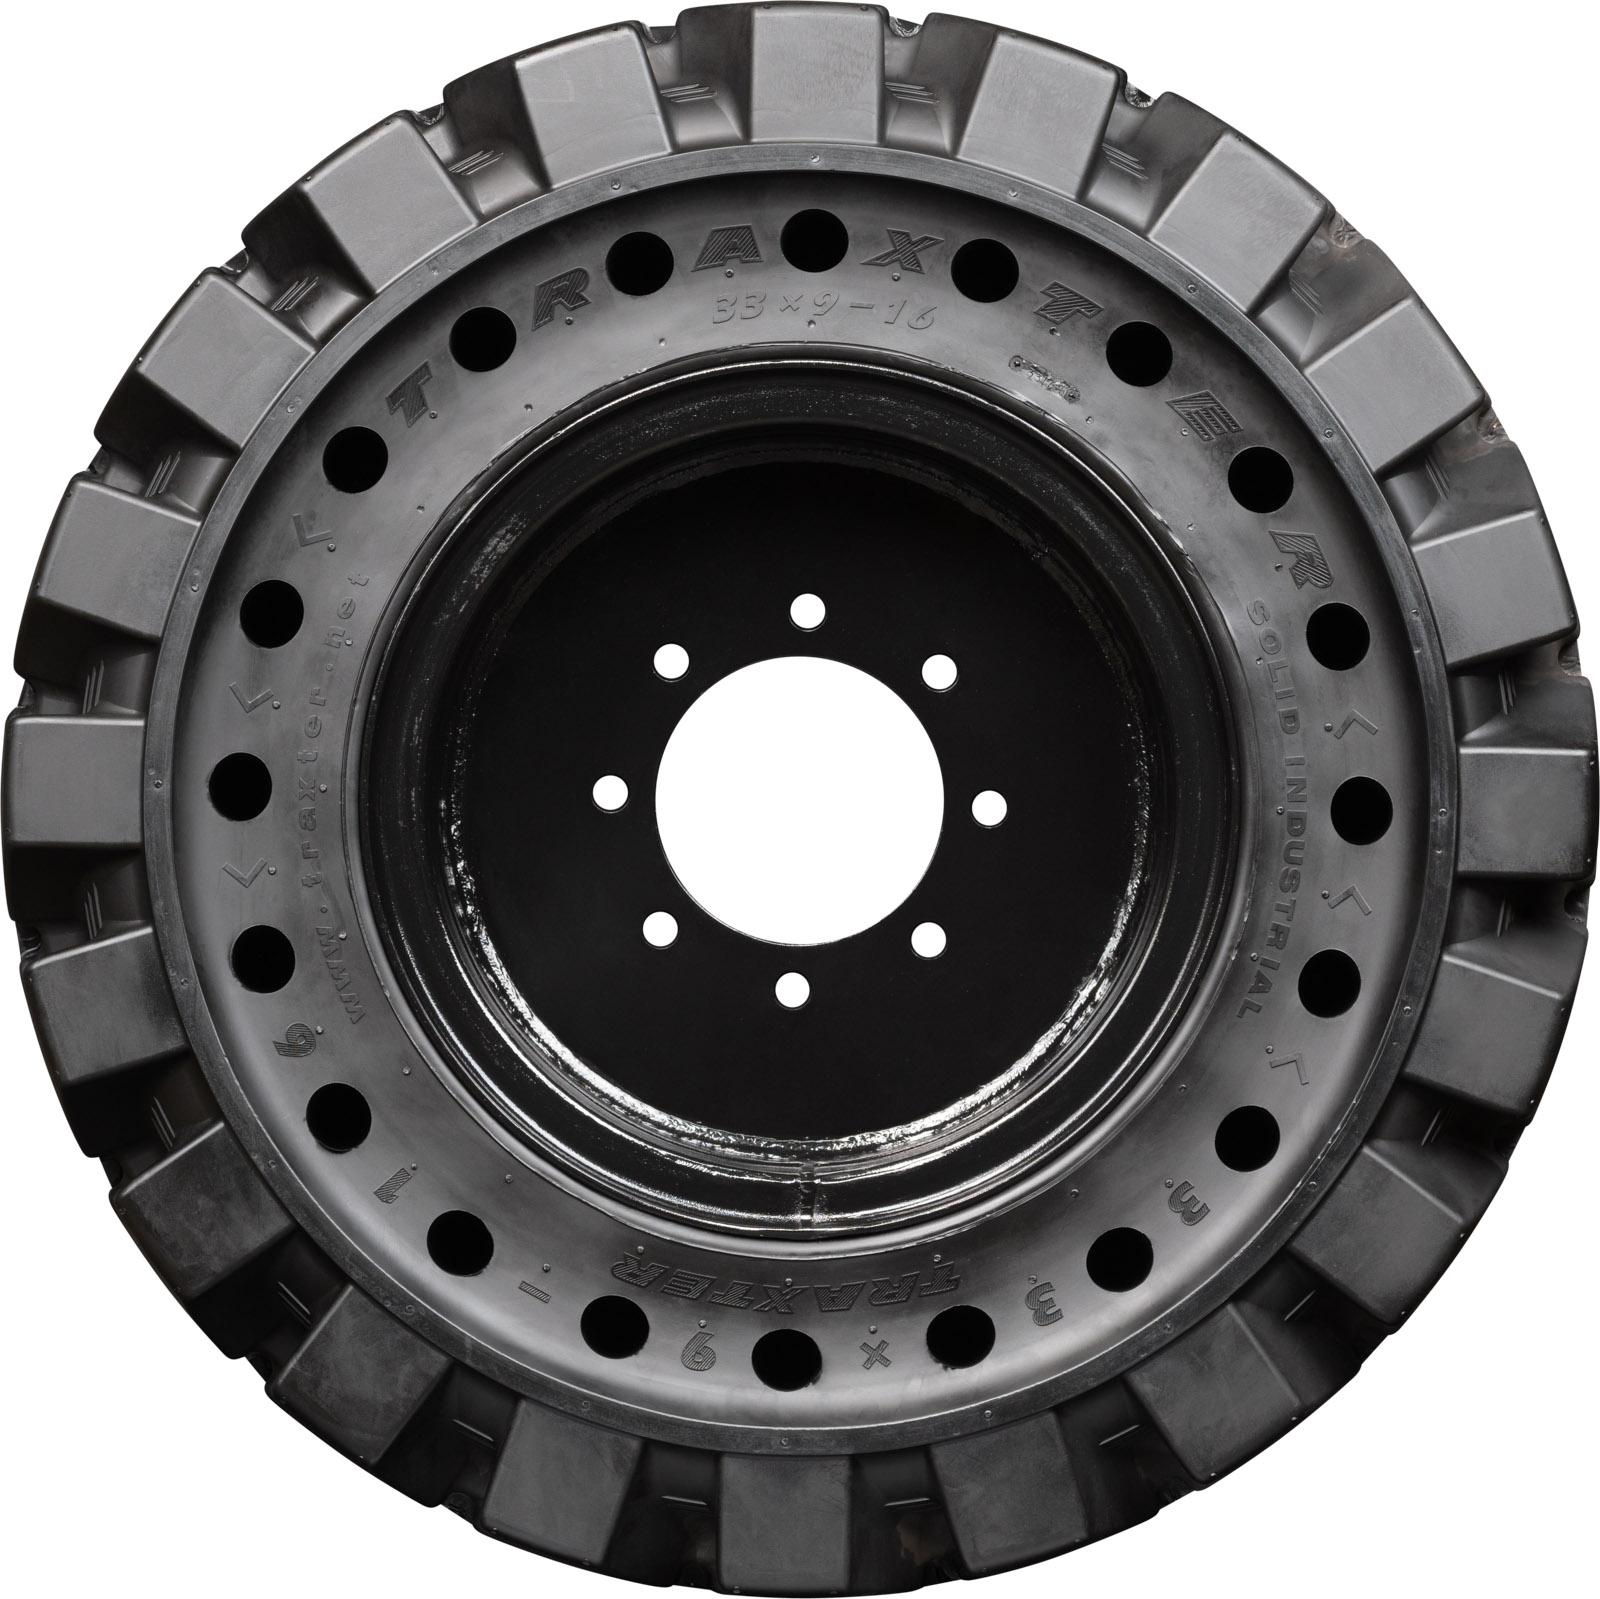 set of 4 33x9-16 (12-16.5) traxter heavy duty solid rubber skid steer tires - 8x8 bolt rim